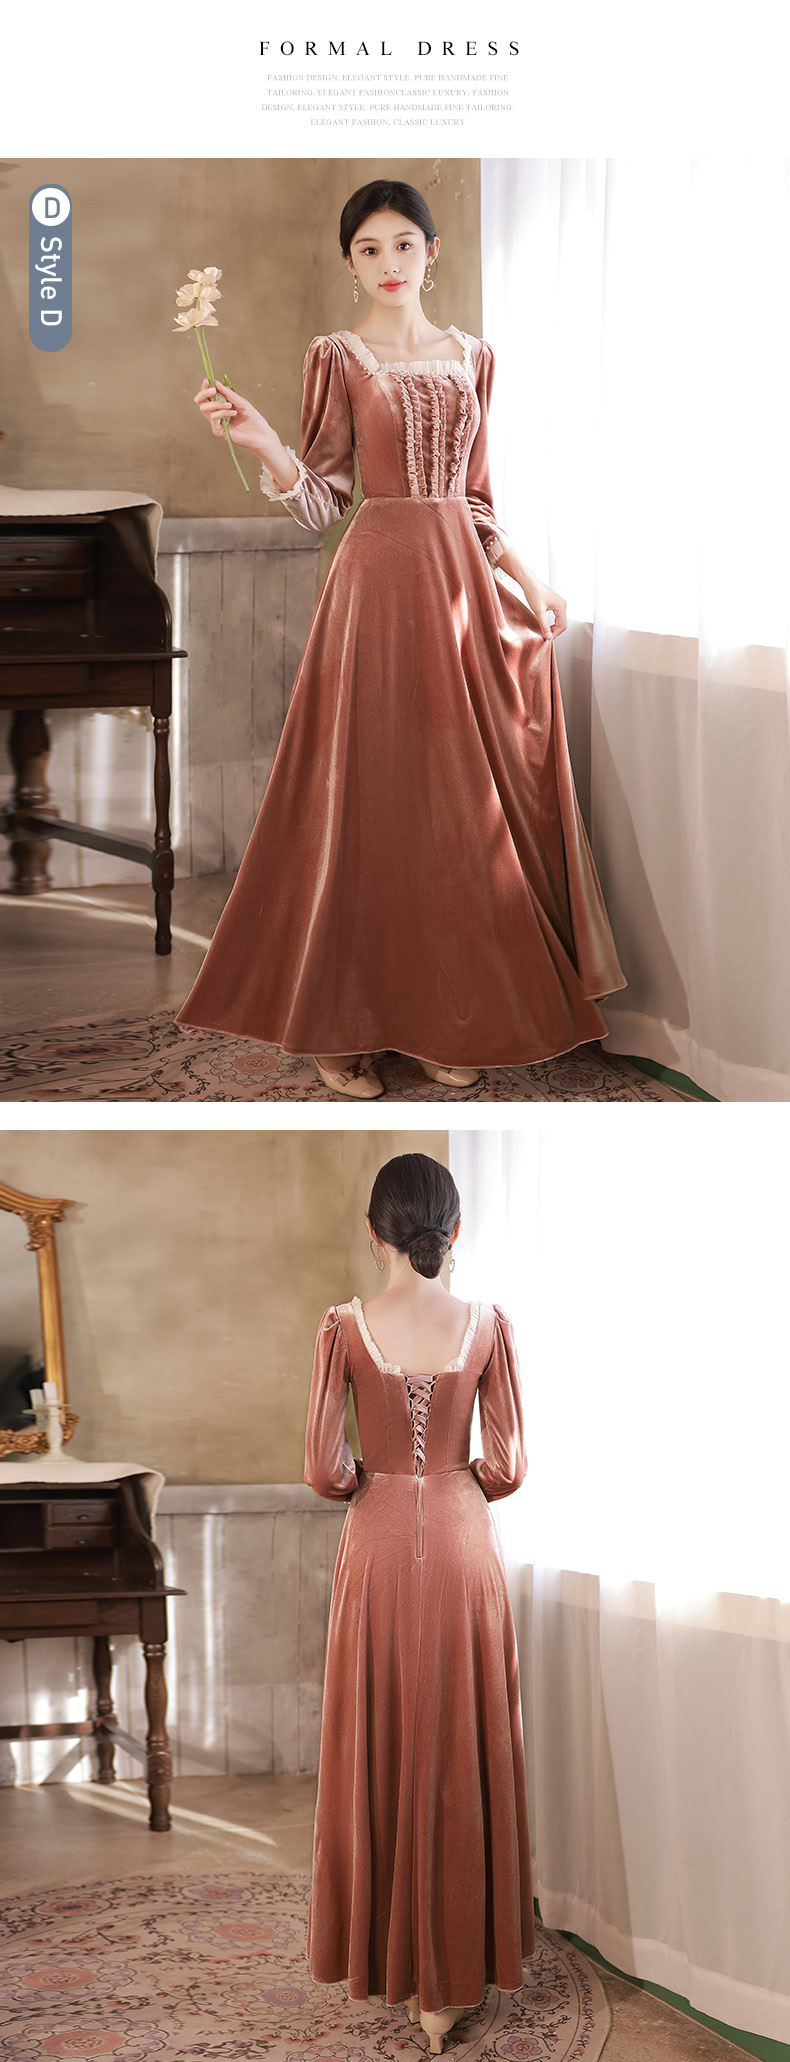 Pink-Velvet-Long-Sleeve-Bridesmaid-Dress-Maid-of-Honor-Party-Gown23.jpg